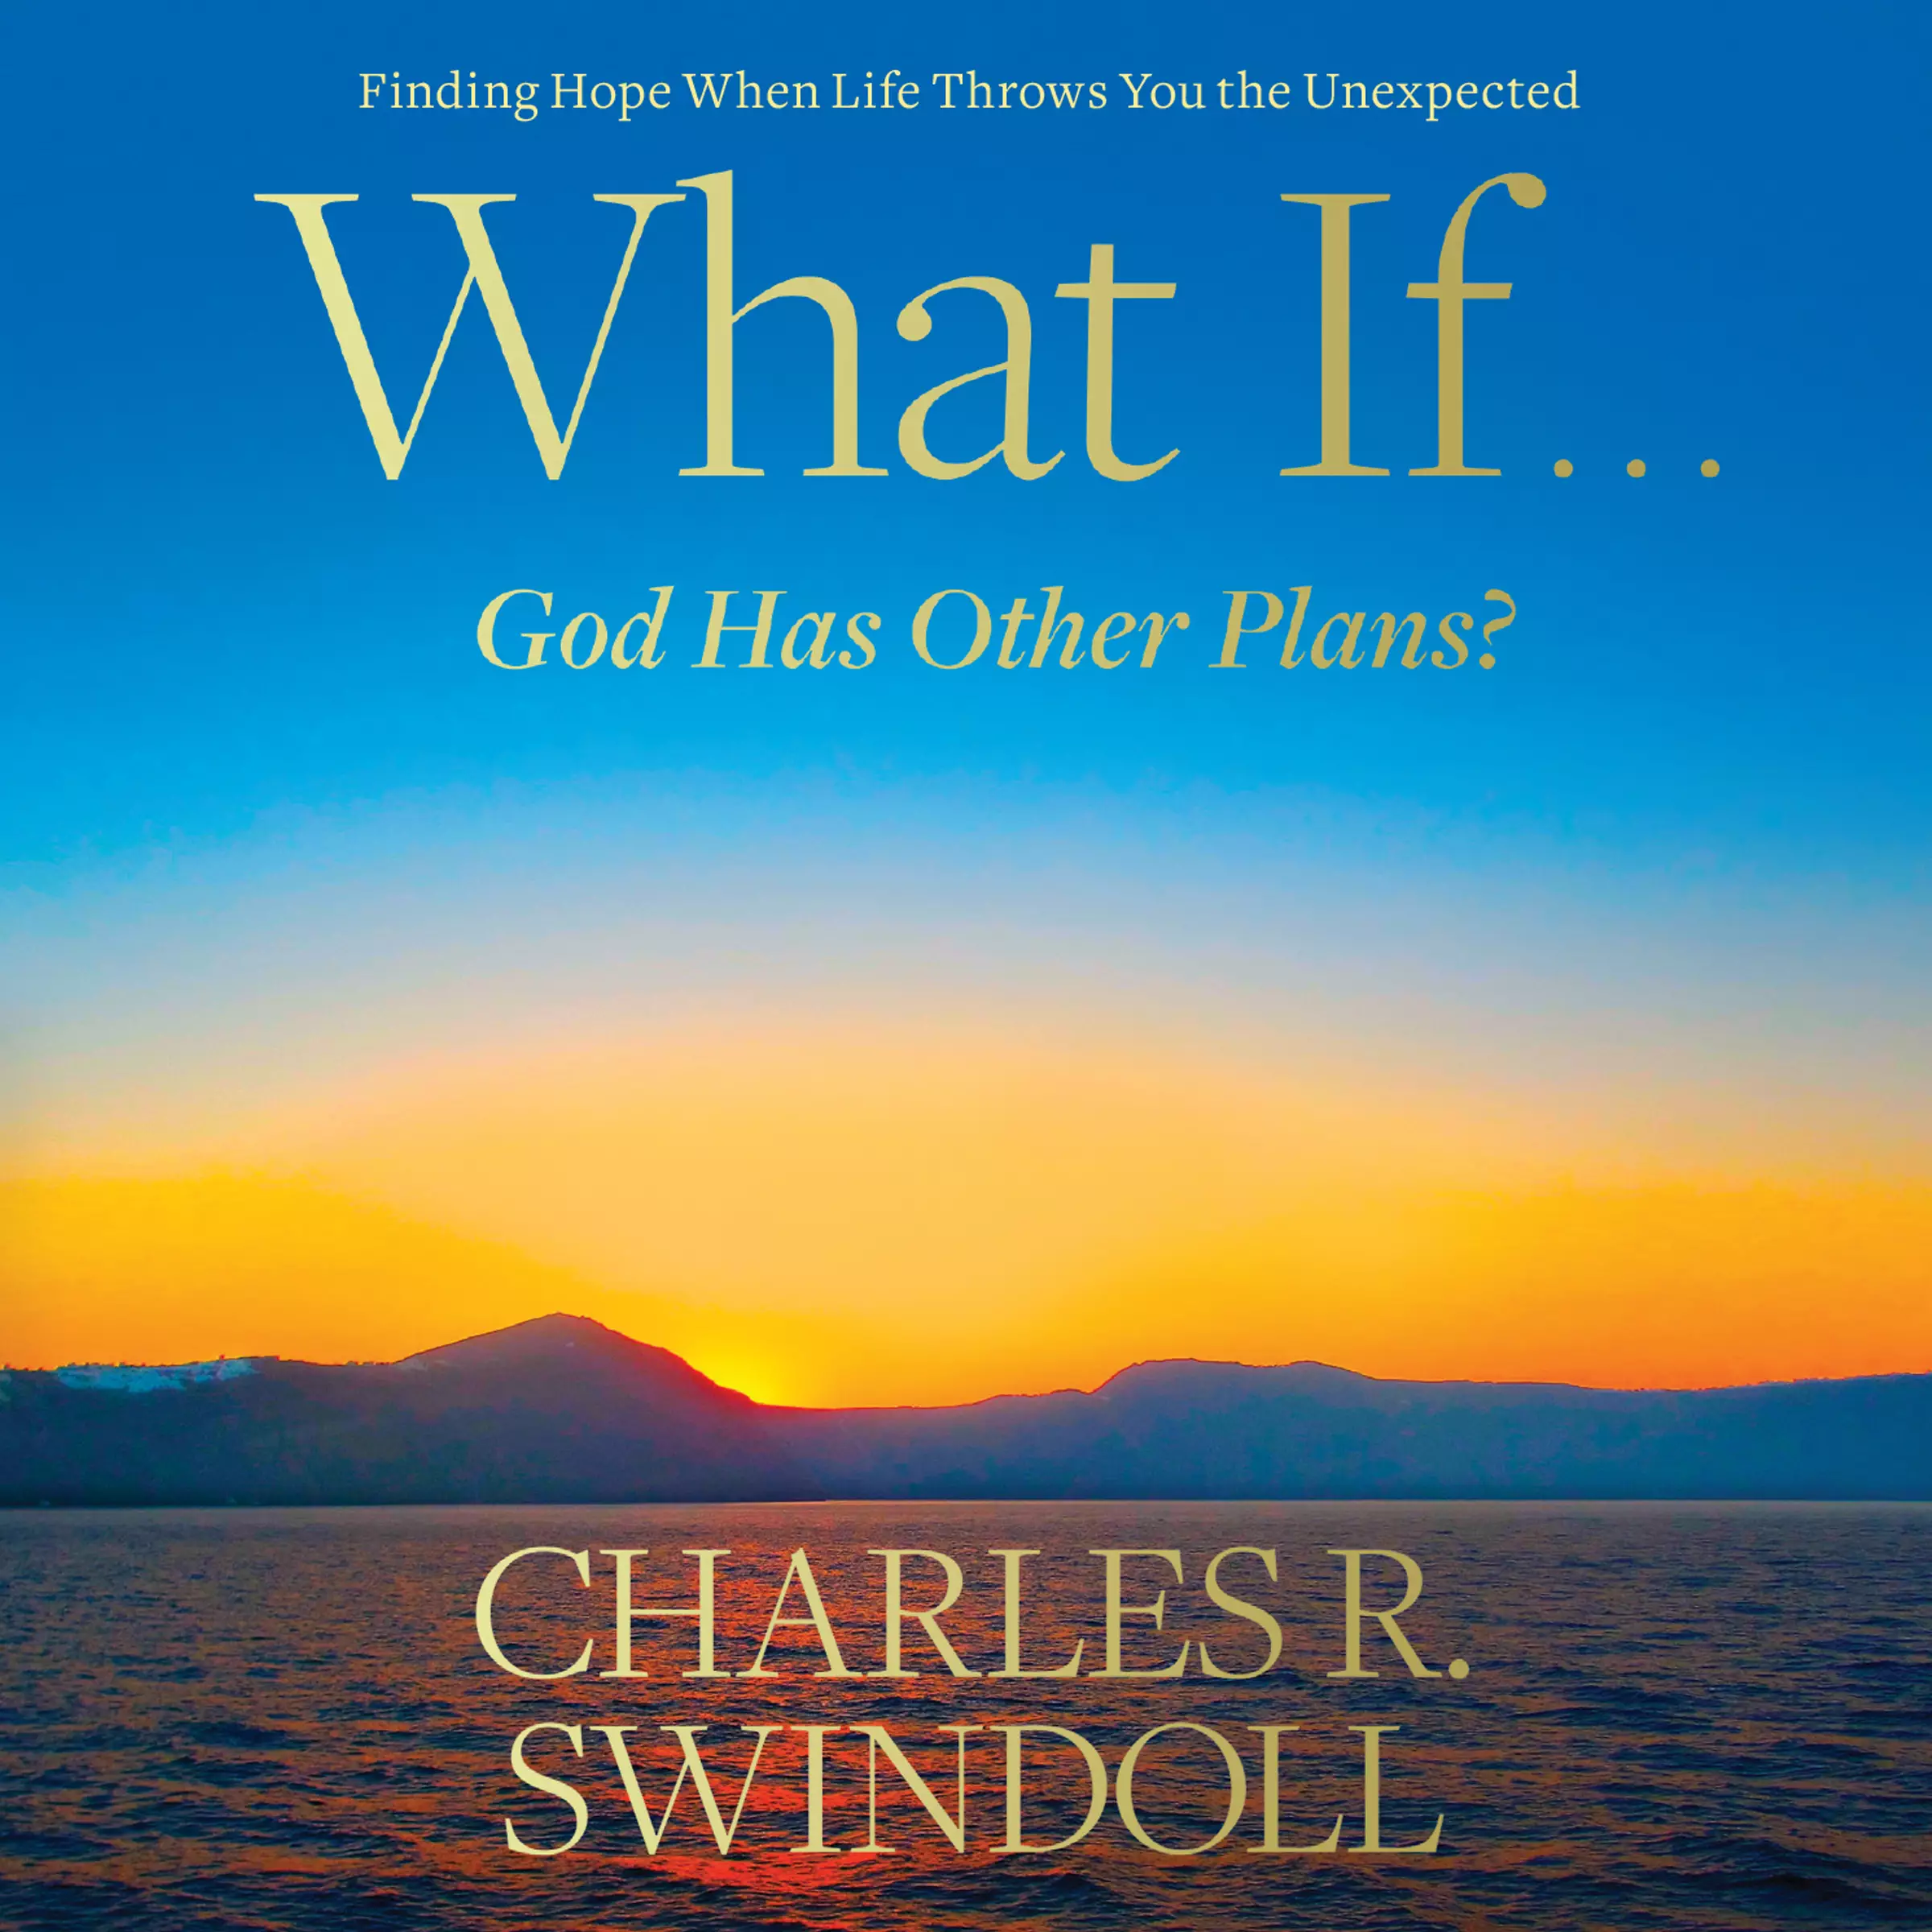 What If...God Has Other Plans?